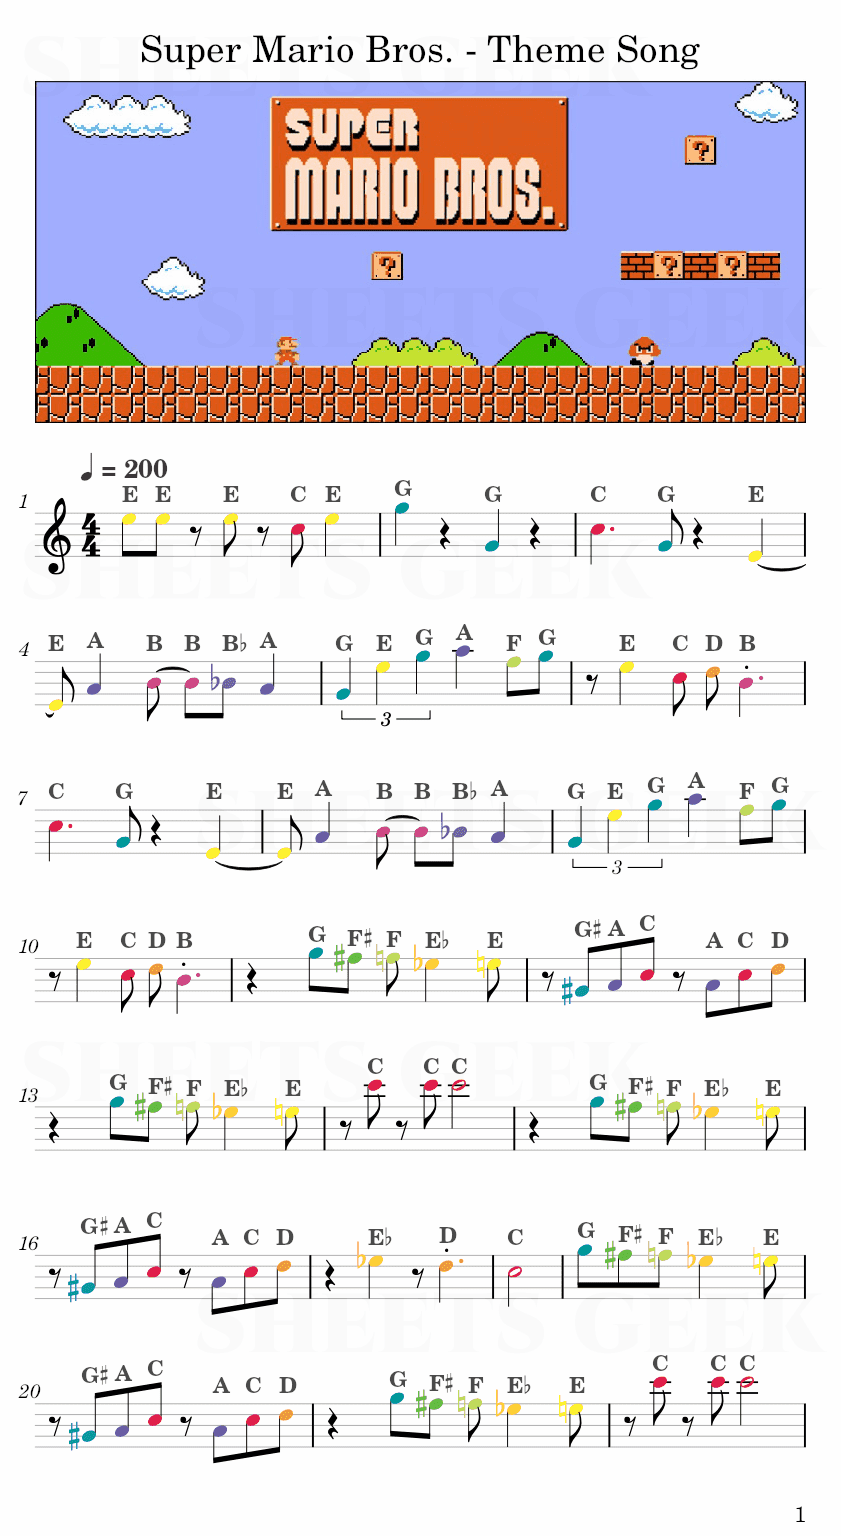 Super Mario Bros. - Theme Song Easy Sheets Music Free for piano, keyboard, flute, violin, sax, celllo 1